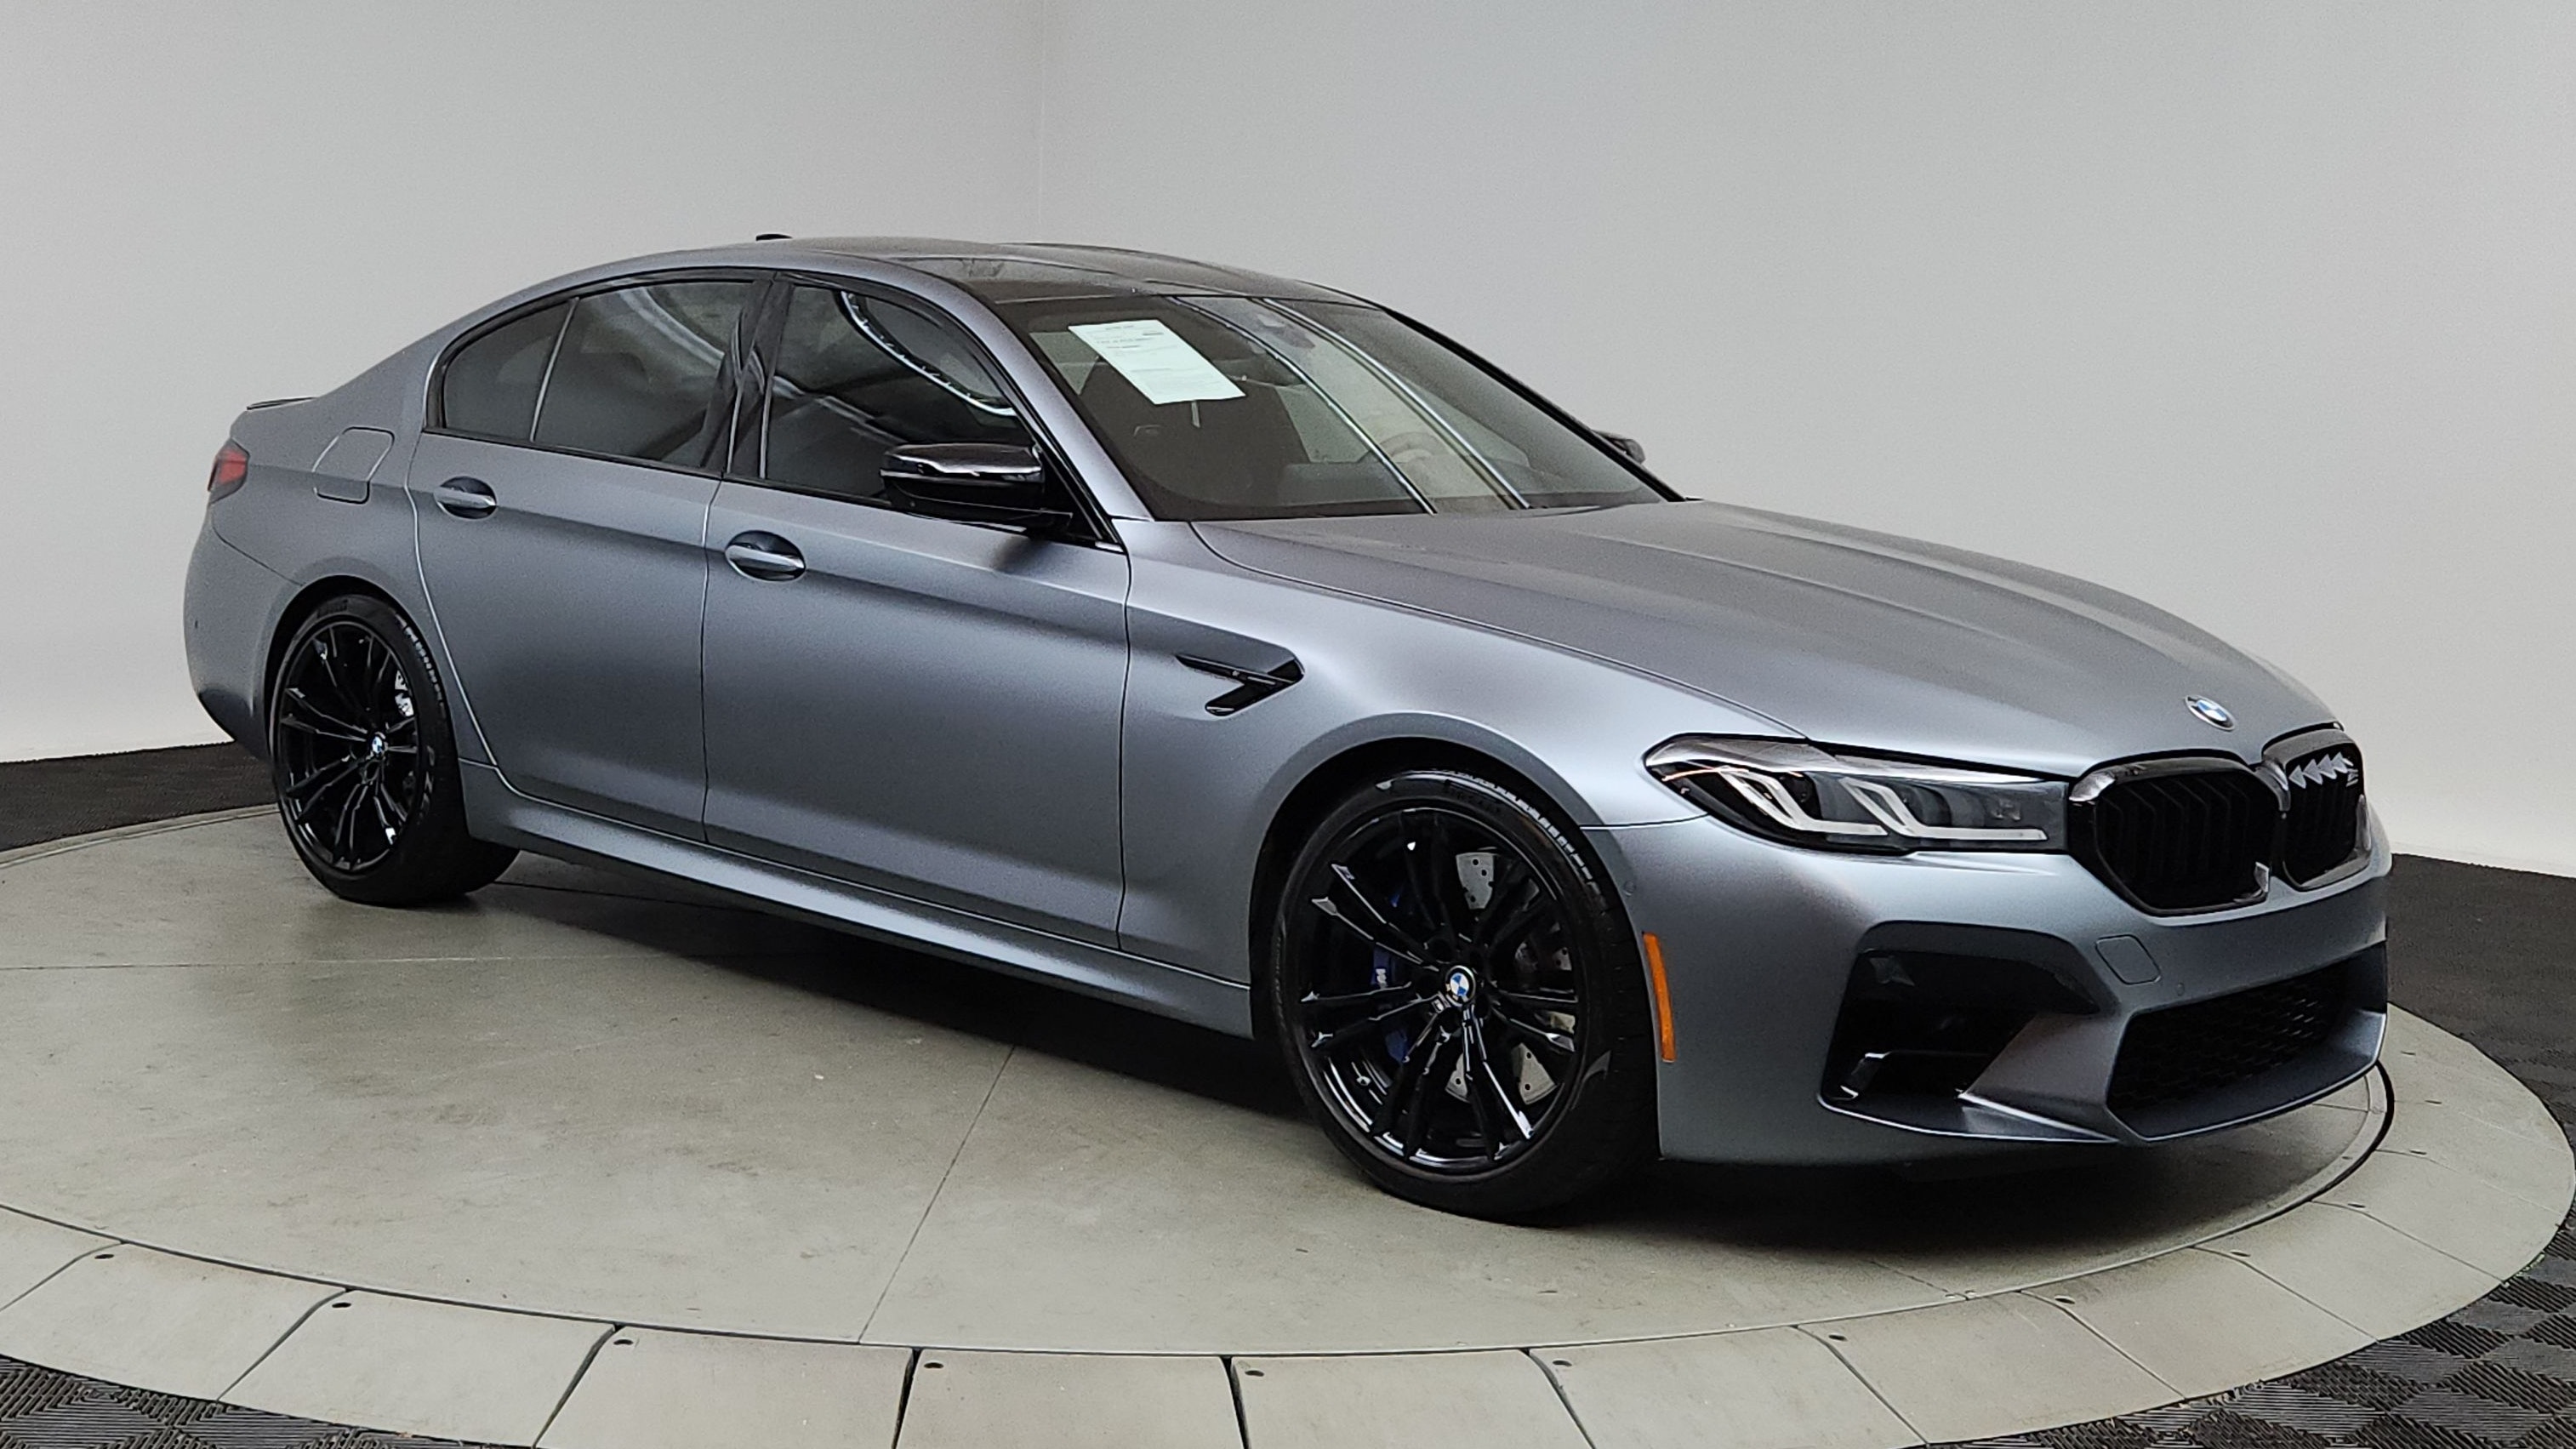 It's Amazing How Cheap the F10 BMW M5 Has Become - Autotrader